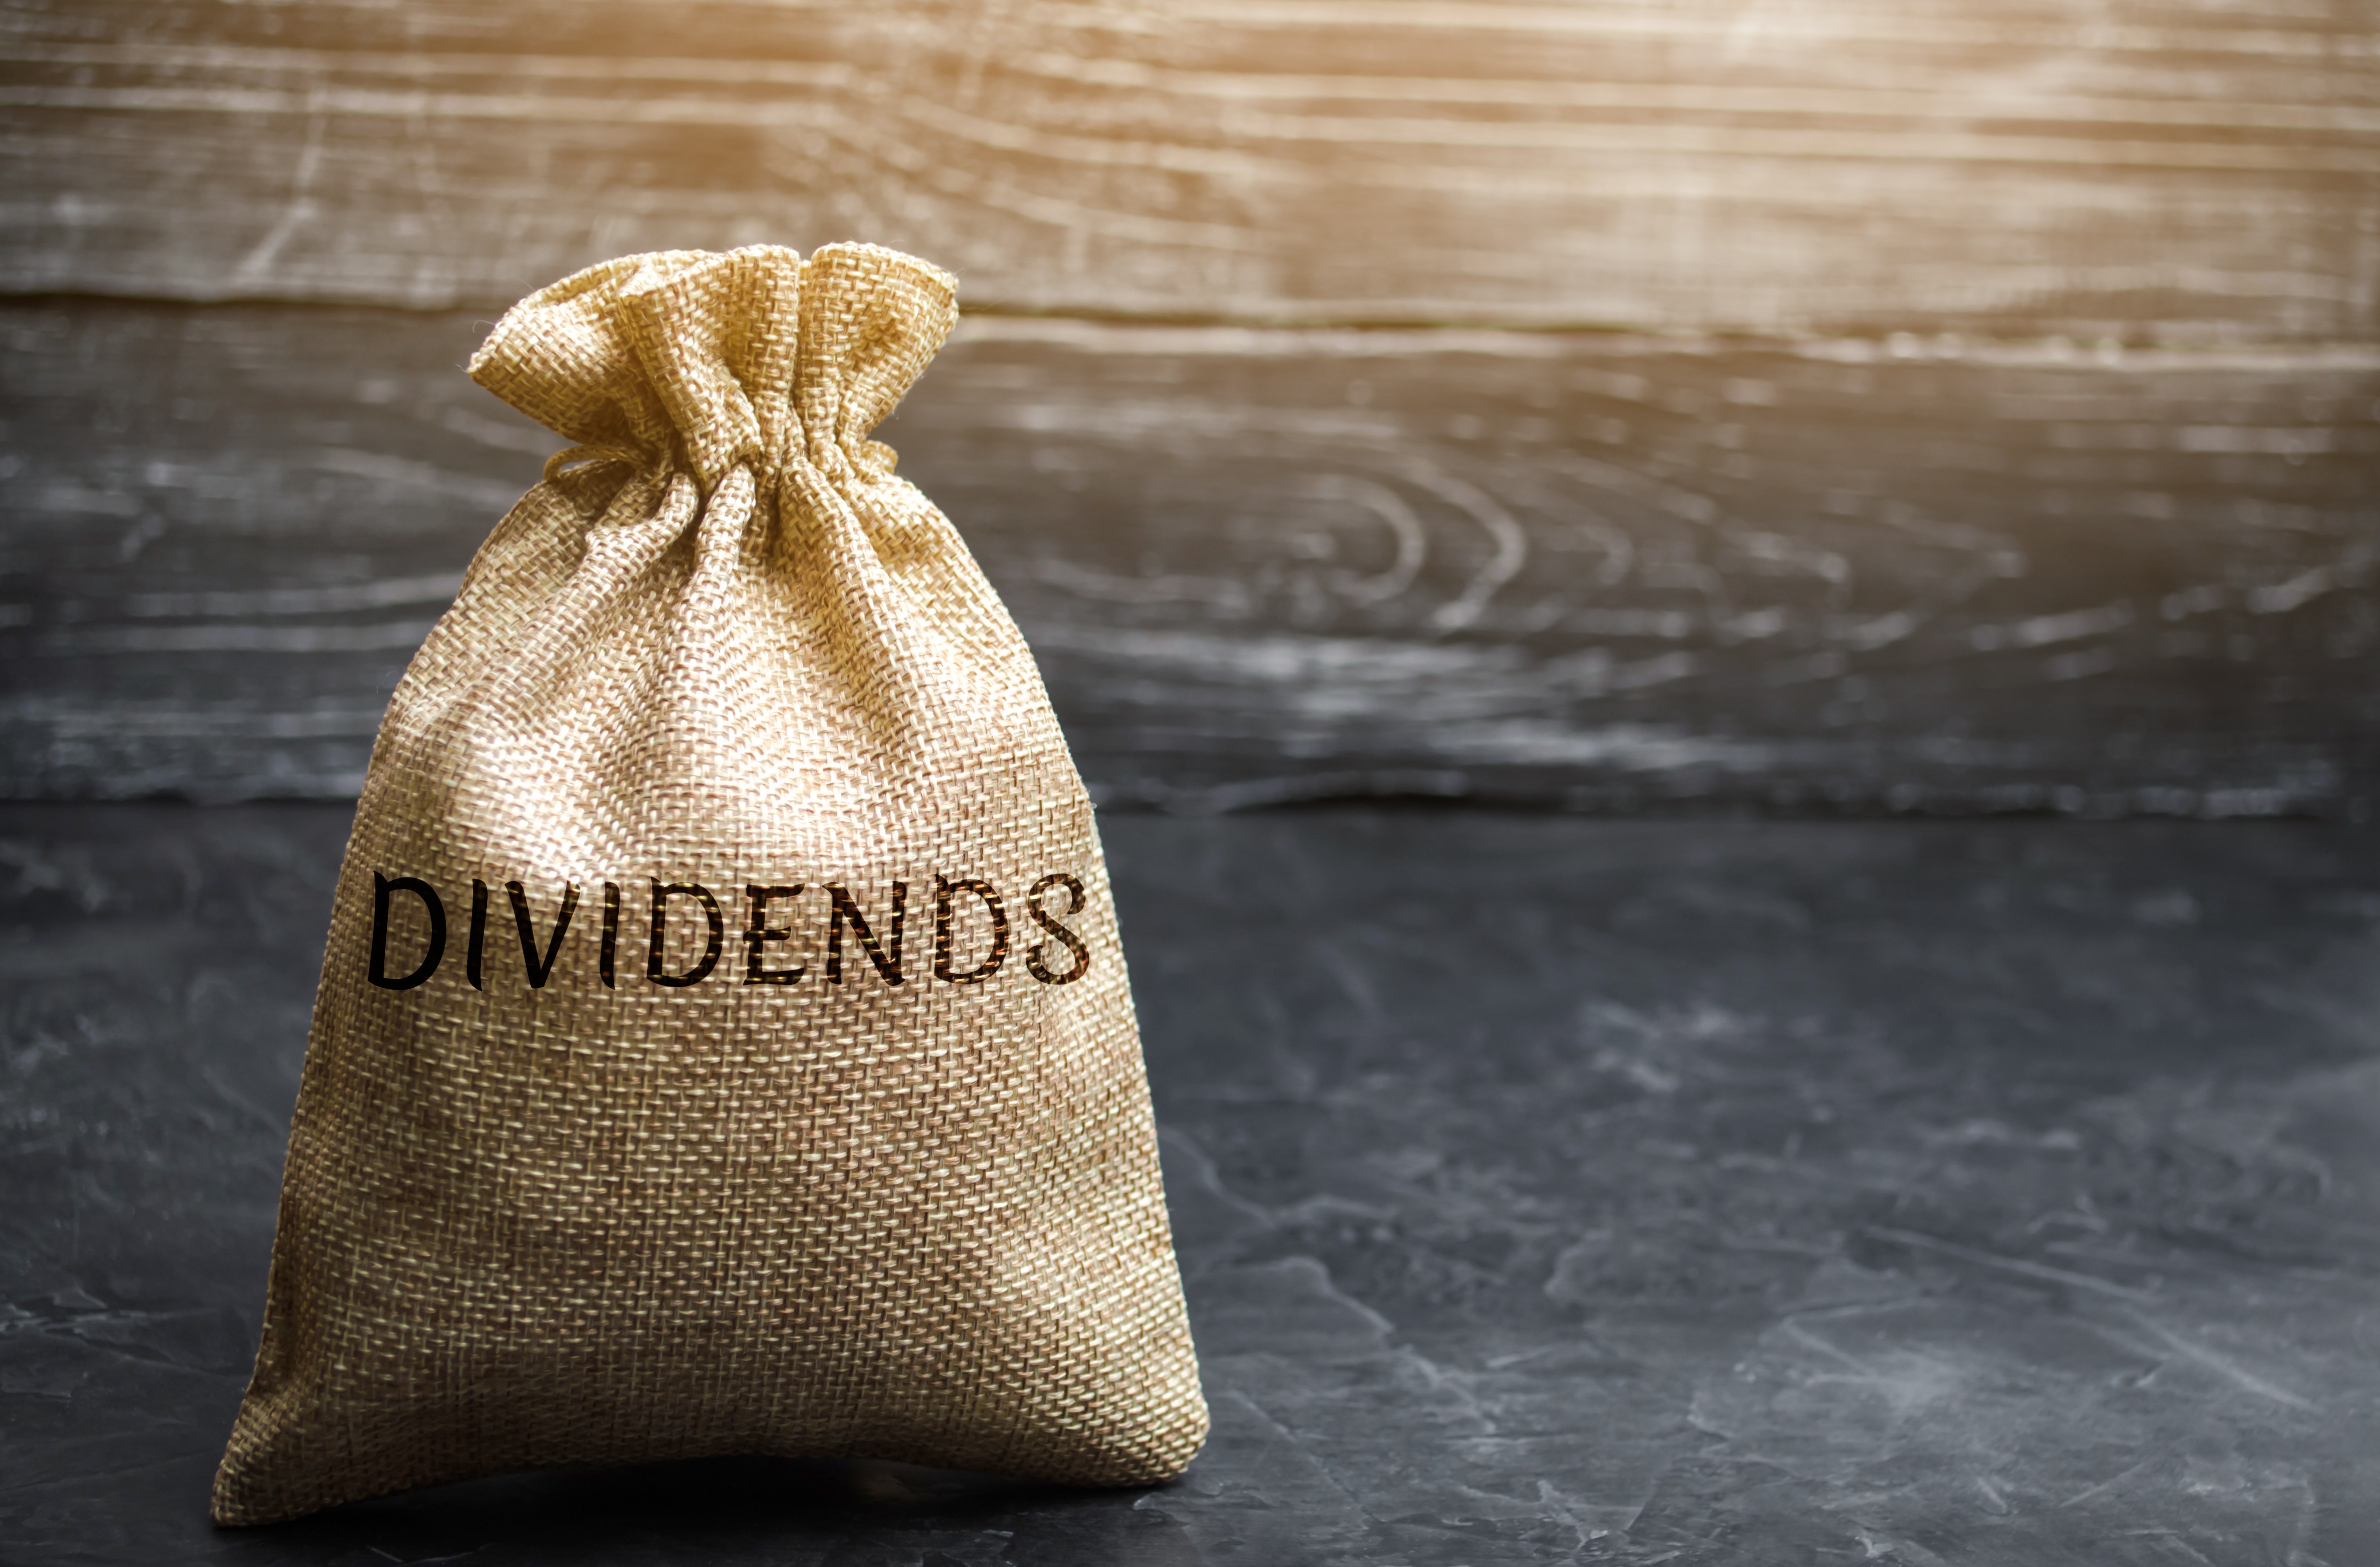 If You Had Invested $1,000 in Kimco Five Years Ago, Here's How Much You Would Have Made in Dividends